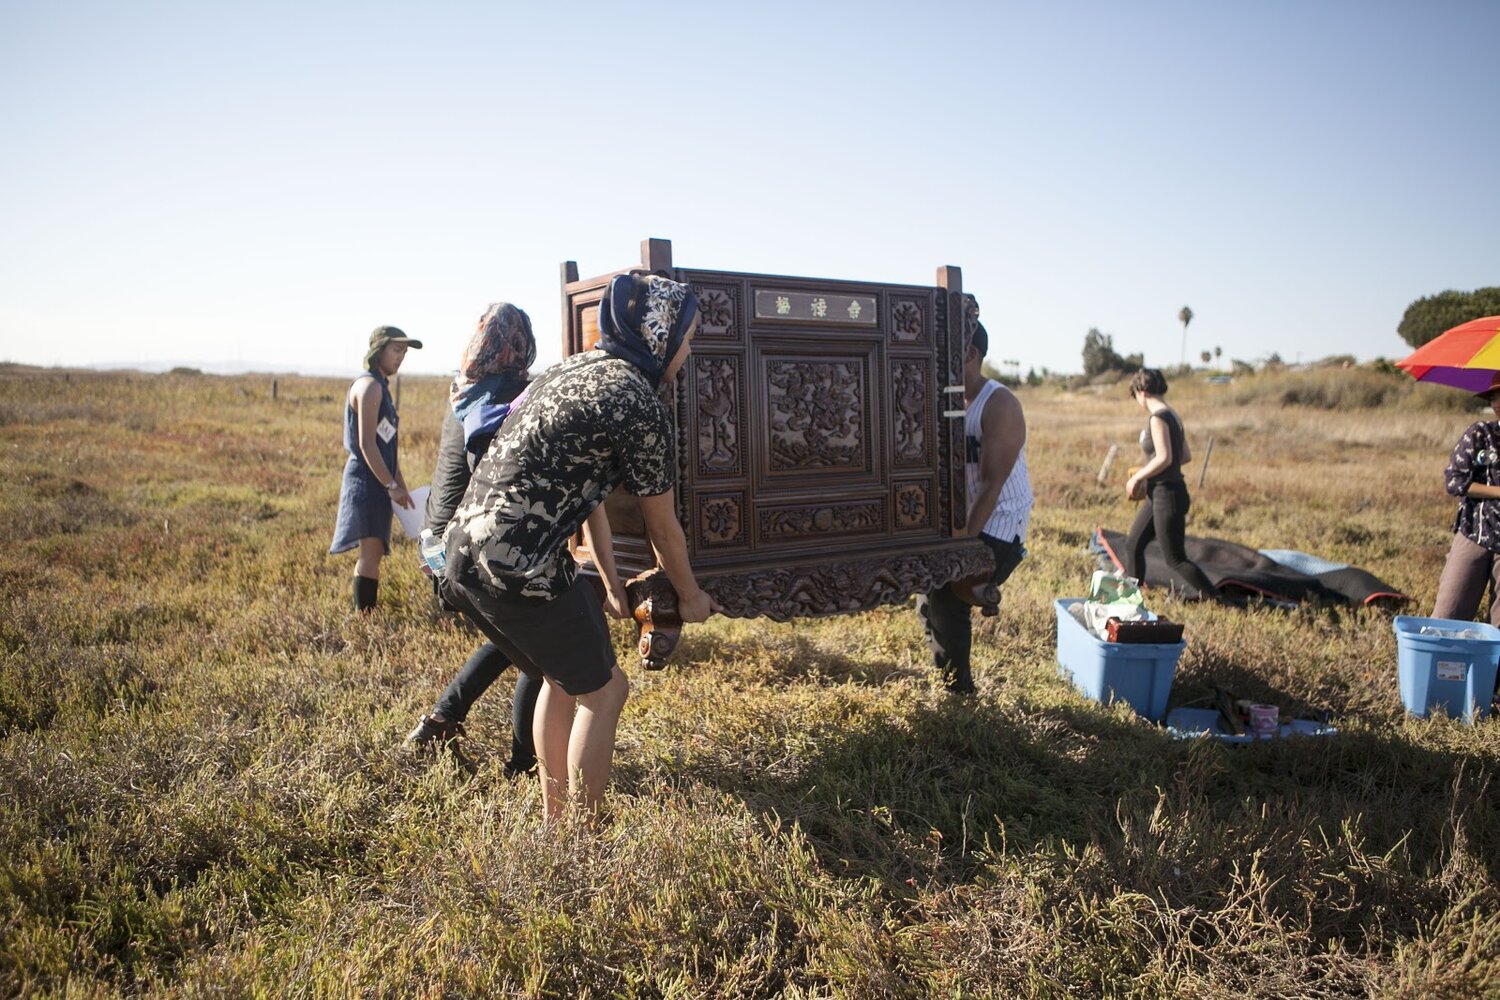  A crew of three people are hauling a 150-lb altar over an open area of dry, grass fields. 